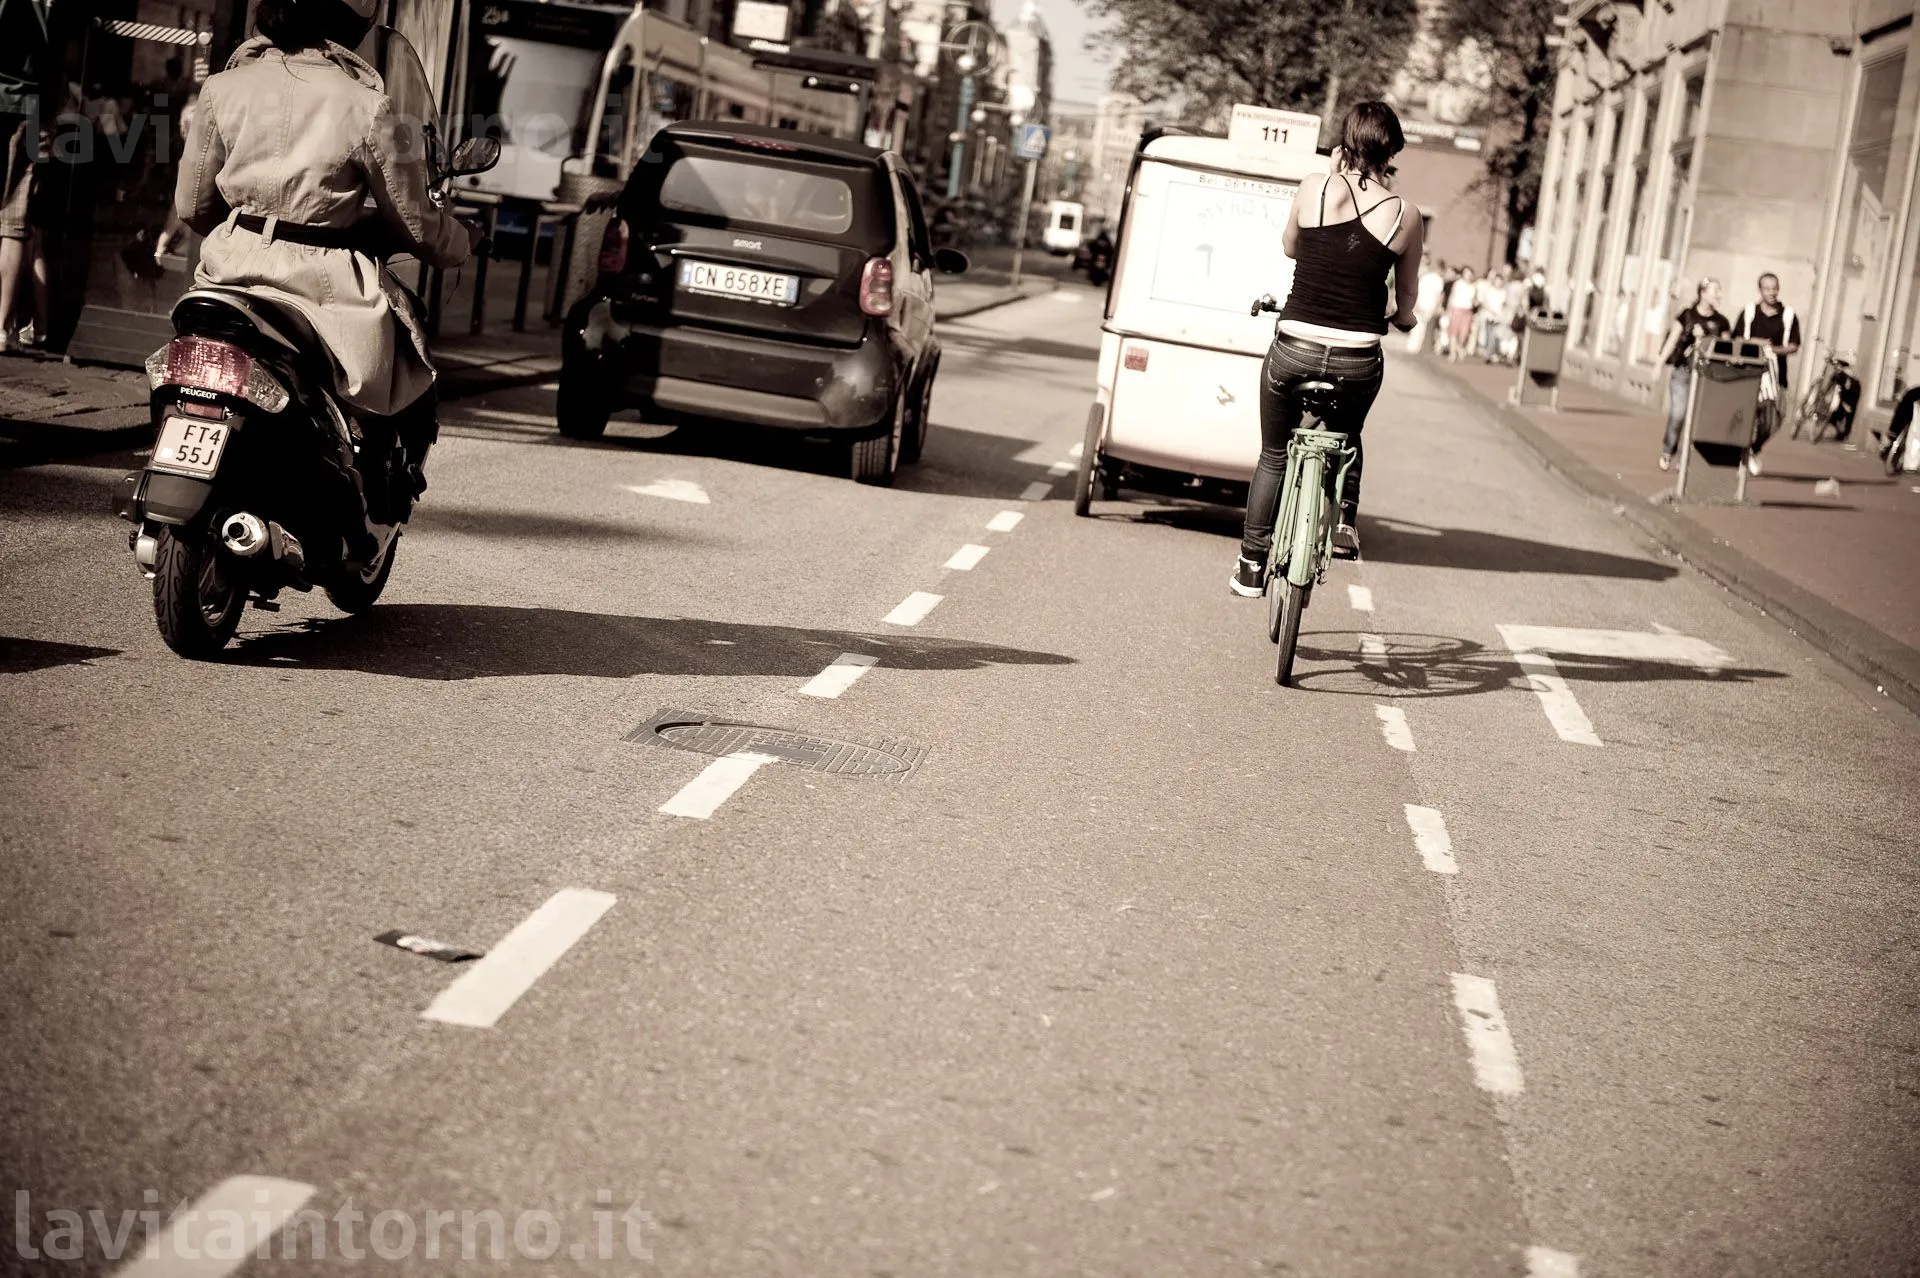 life's moments @ Amsterdam: bike's time